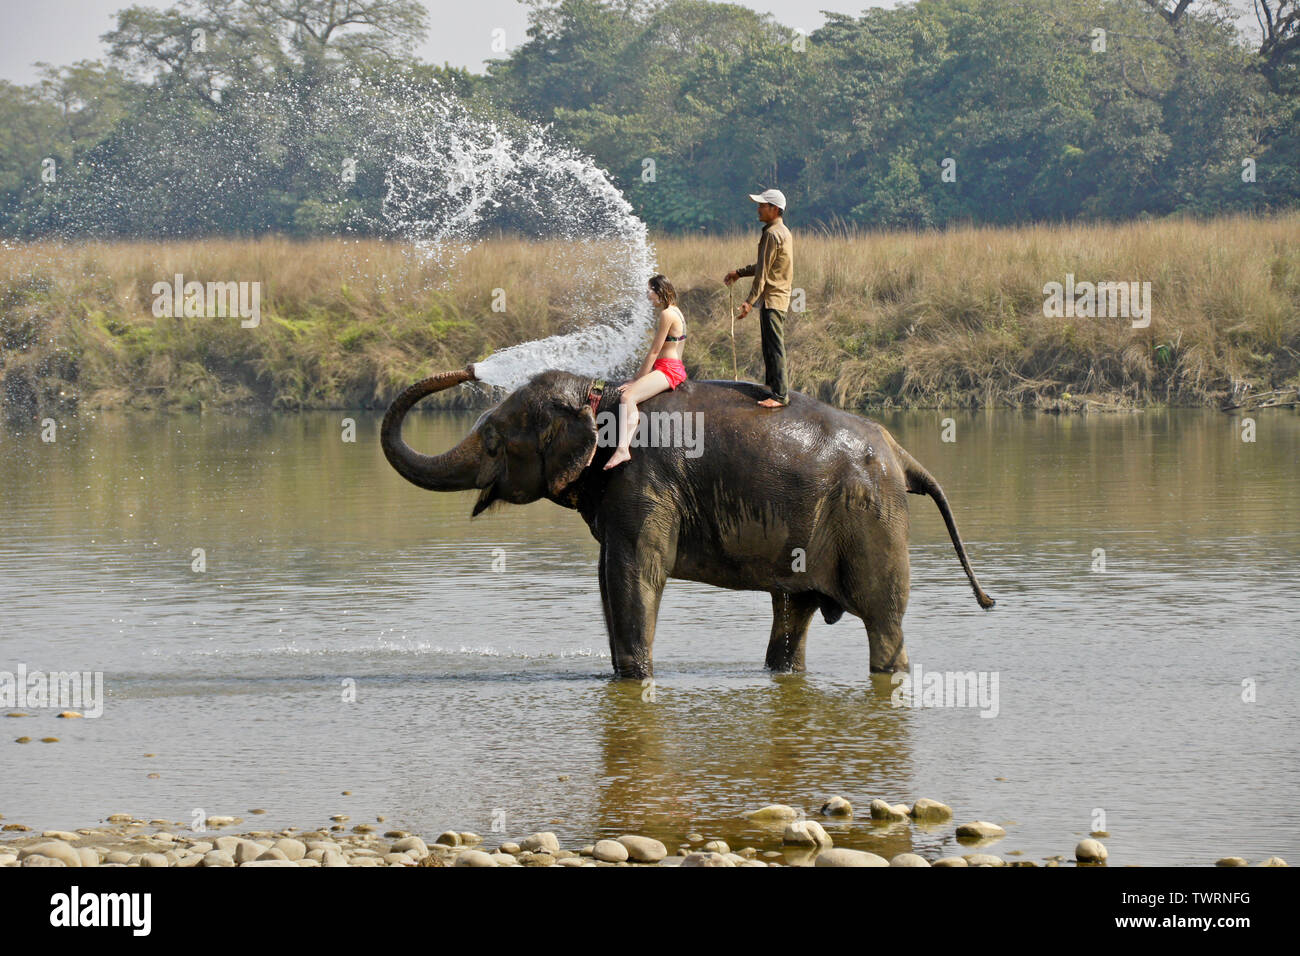 Female tourist and mahout on Asian elephant spraying water in Rapti River, Chitwan National Park, Nepal Stock Photo